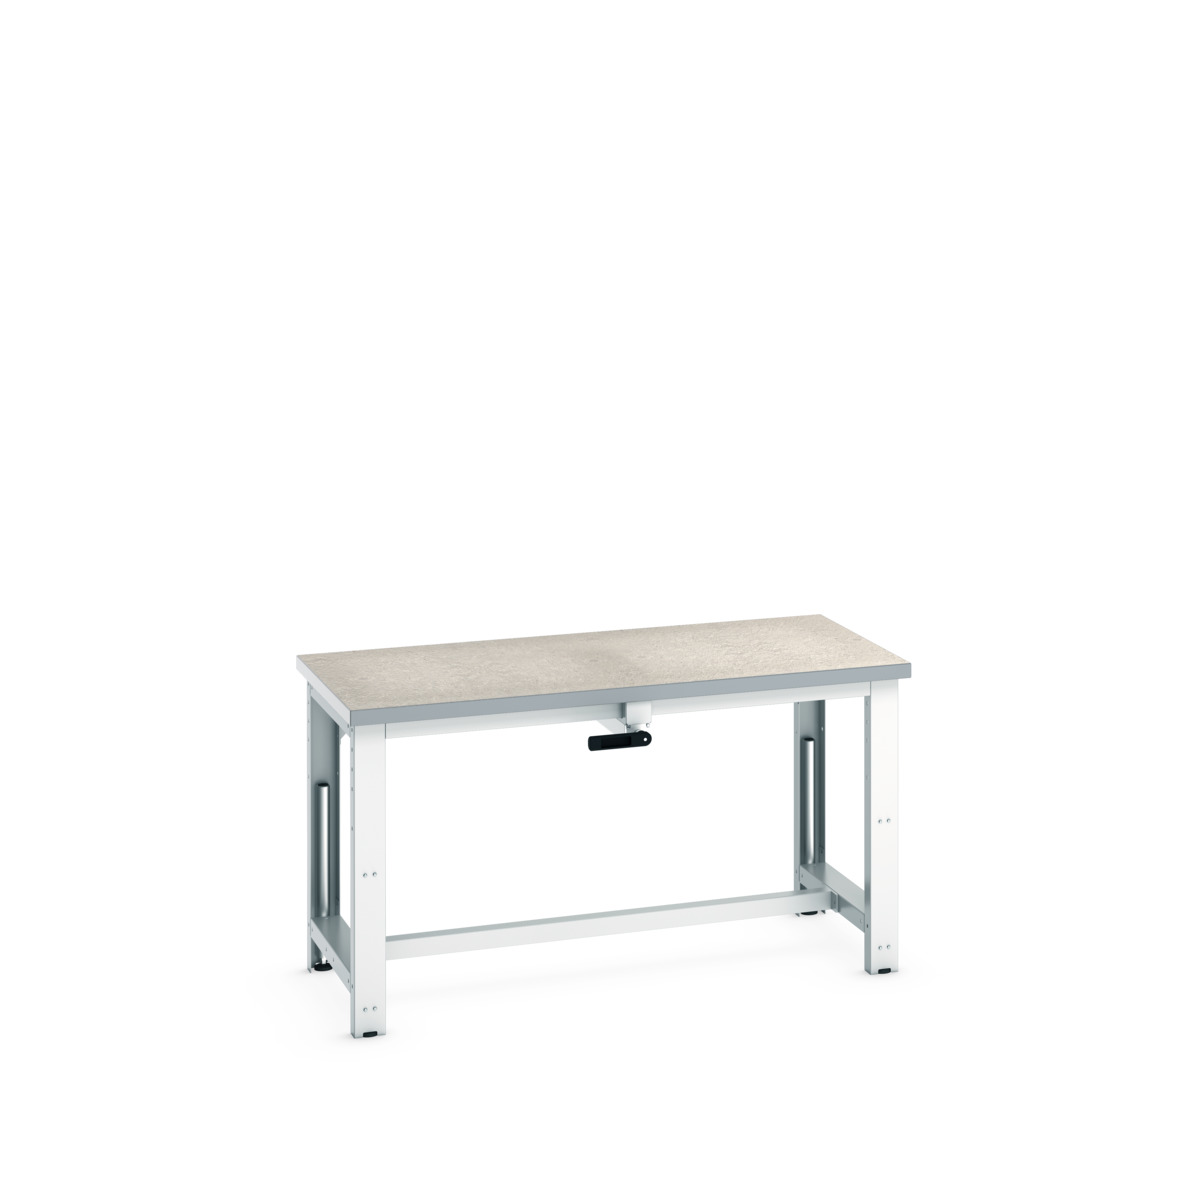 41003575. - cubio stepless adjustable height bench